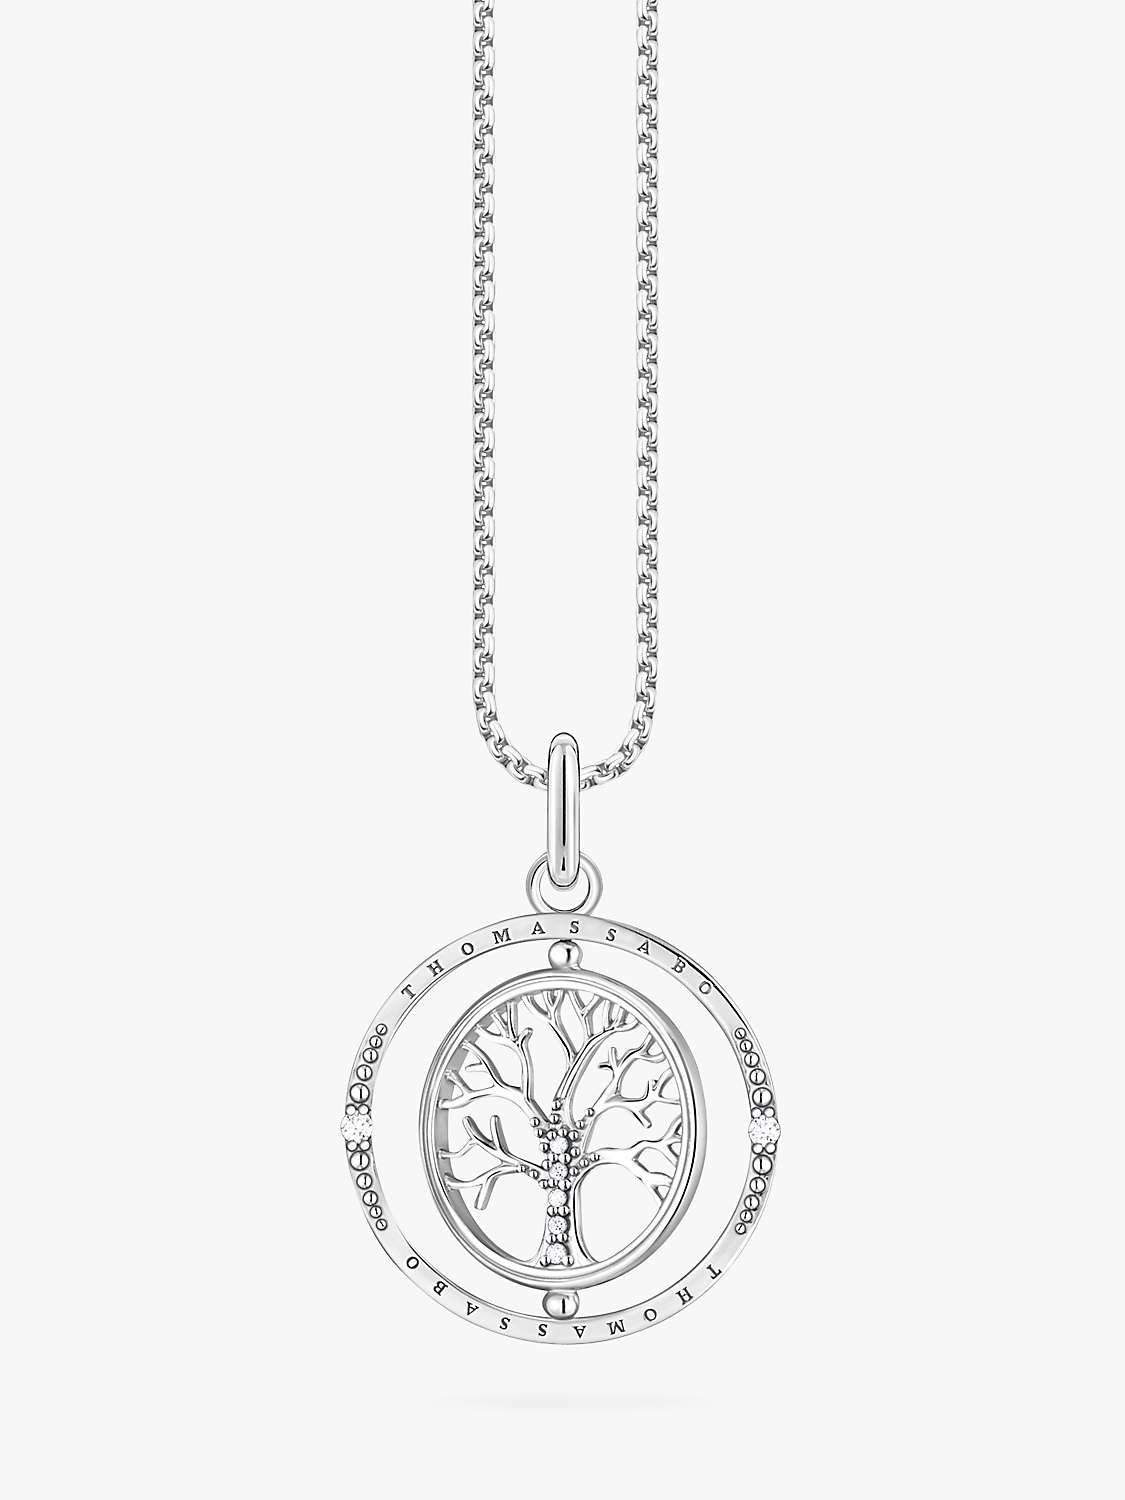 Buy THOMAS SABO Tree of Love Cubic Zirconia Pendant Necklace, Silver Online at johnlewis.com